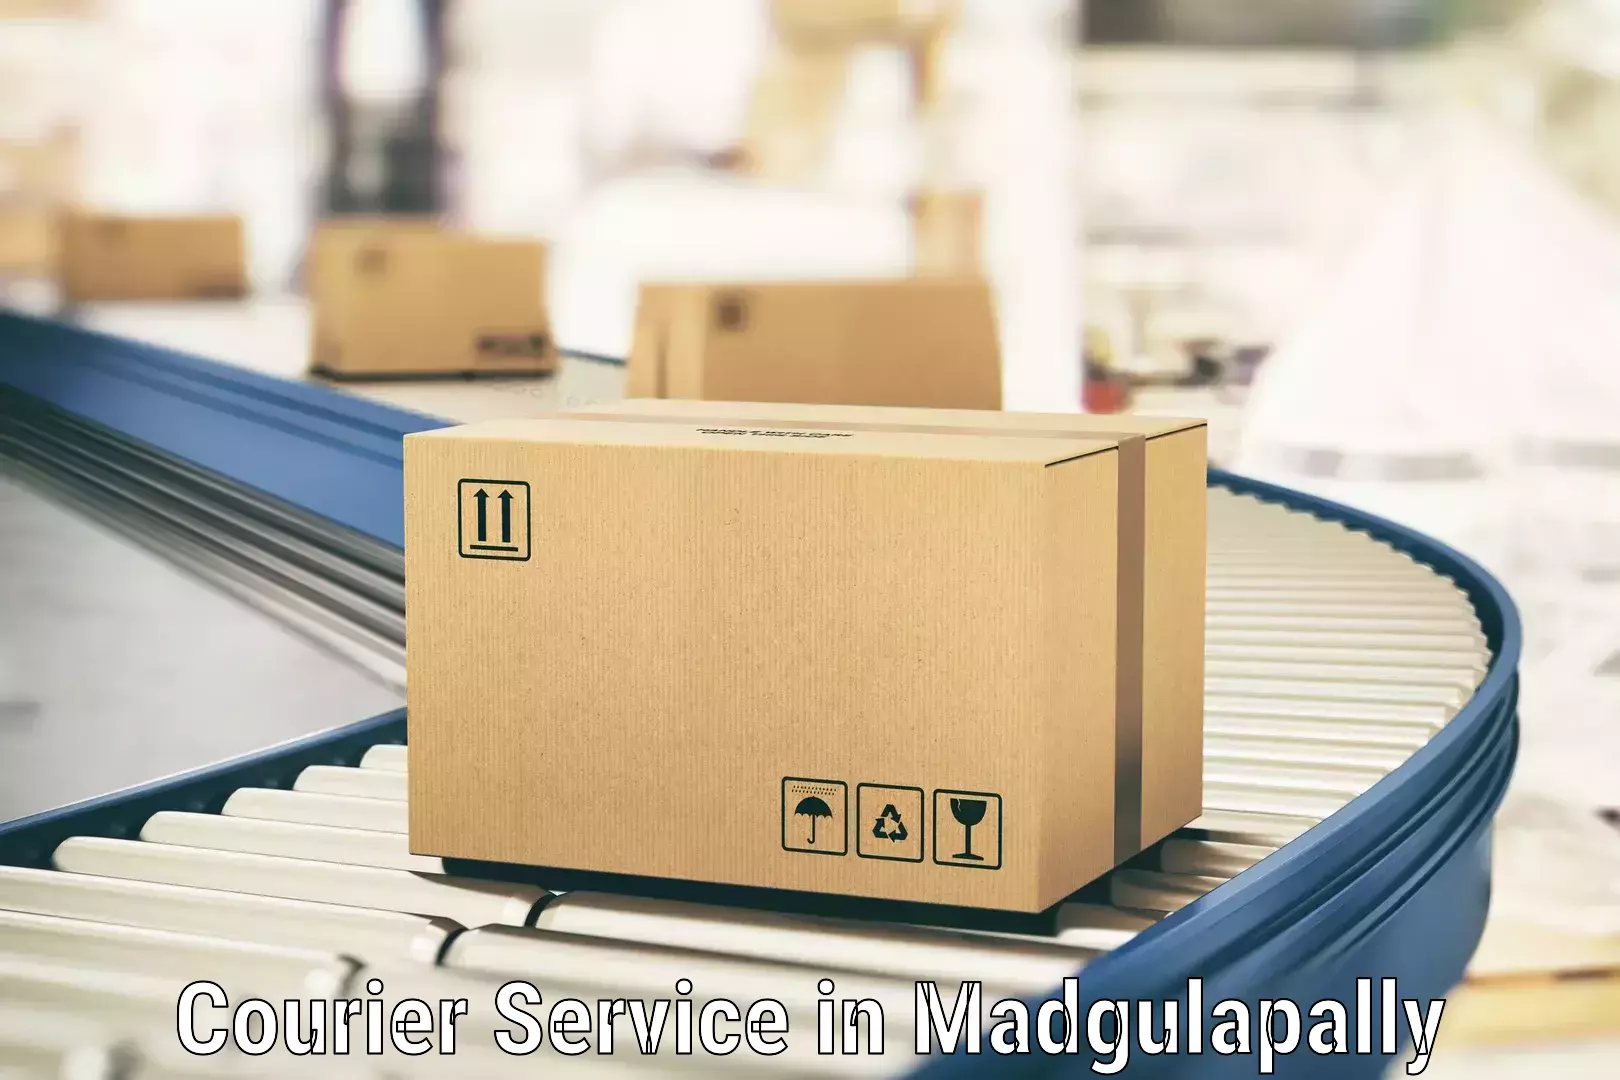 Express logistics service in Madgulapally